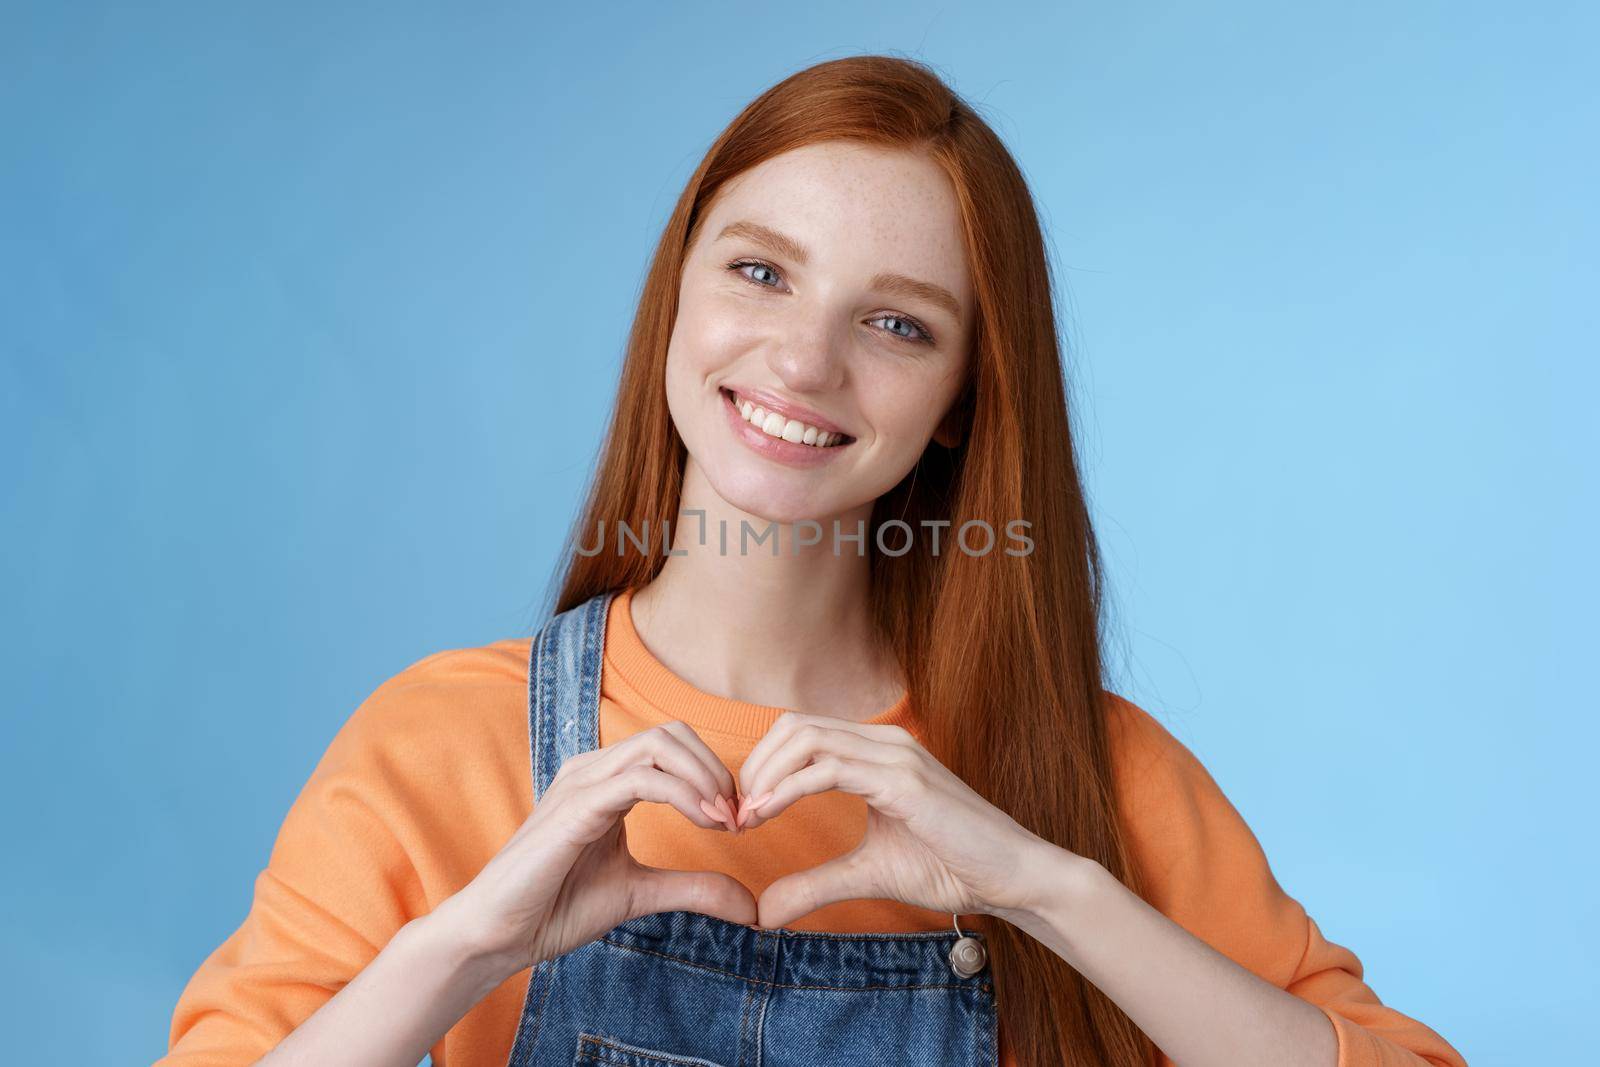 Love you. Attractive romantic tender redhead smiling gentle girlfriend blue eyes freckles show heart chest express sympathy romantic positive attitude confess passionate deep feelings, grinning cute.